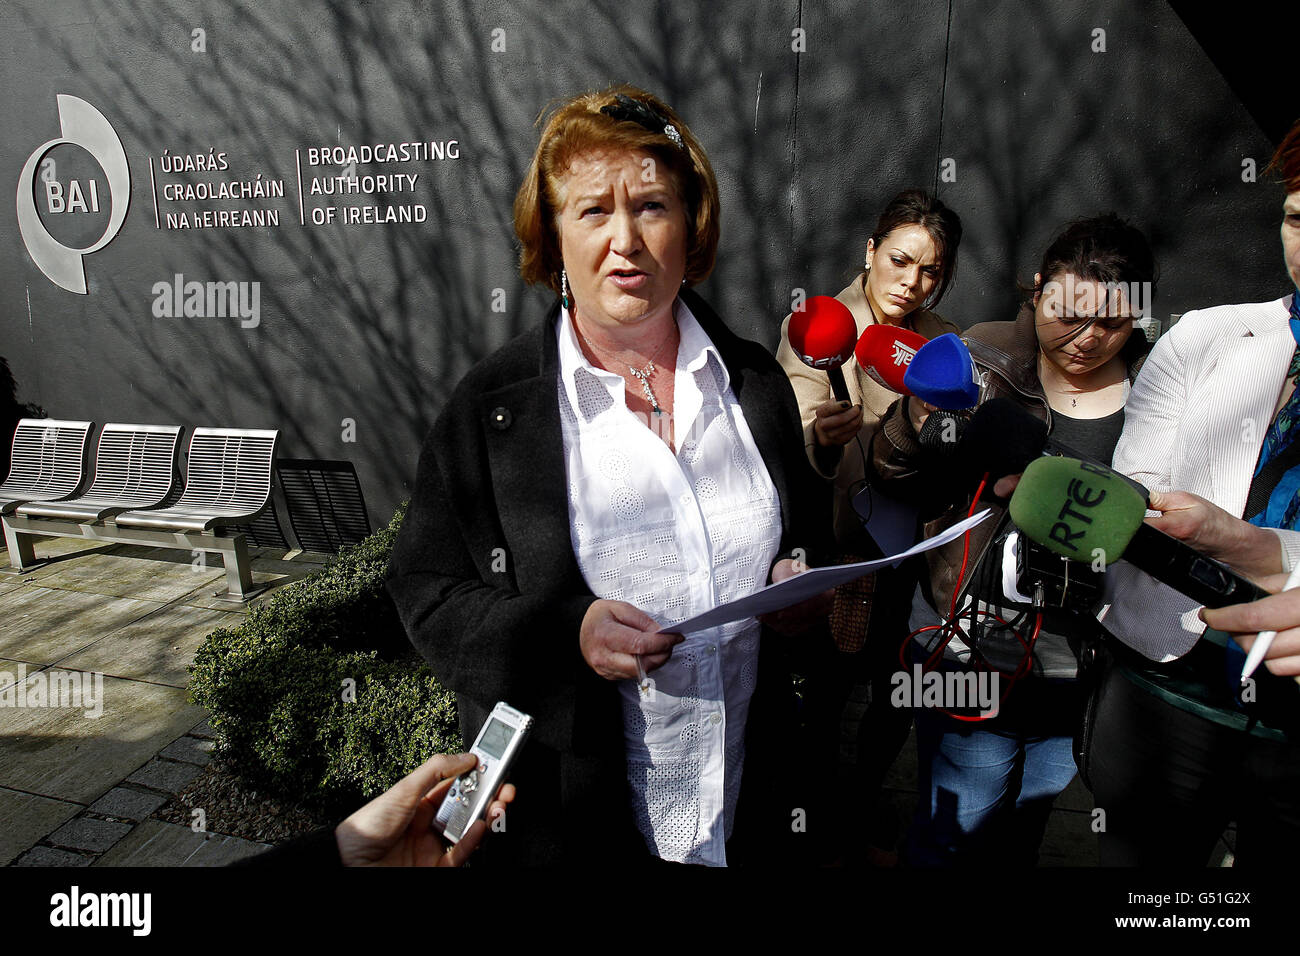 Pamela Cassidy, solicitor to 2011 Irish presidential candidate Sean Gallagher, arrives to read a statement on his behalf outside the BAI (Broadcasting Authority of Ireland) offices, Dublin, in relation to RTE's Frontline Presidential debate. Stock Photo